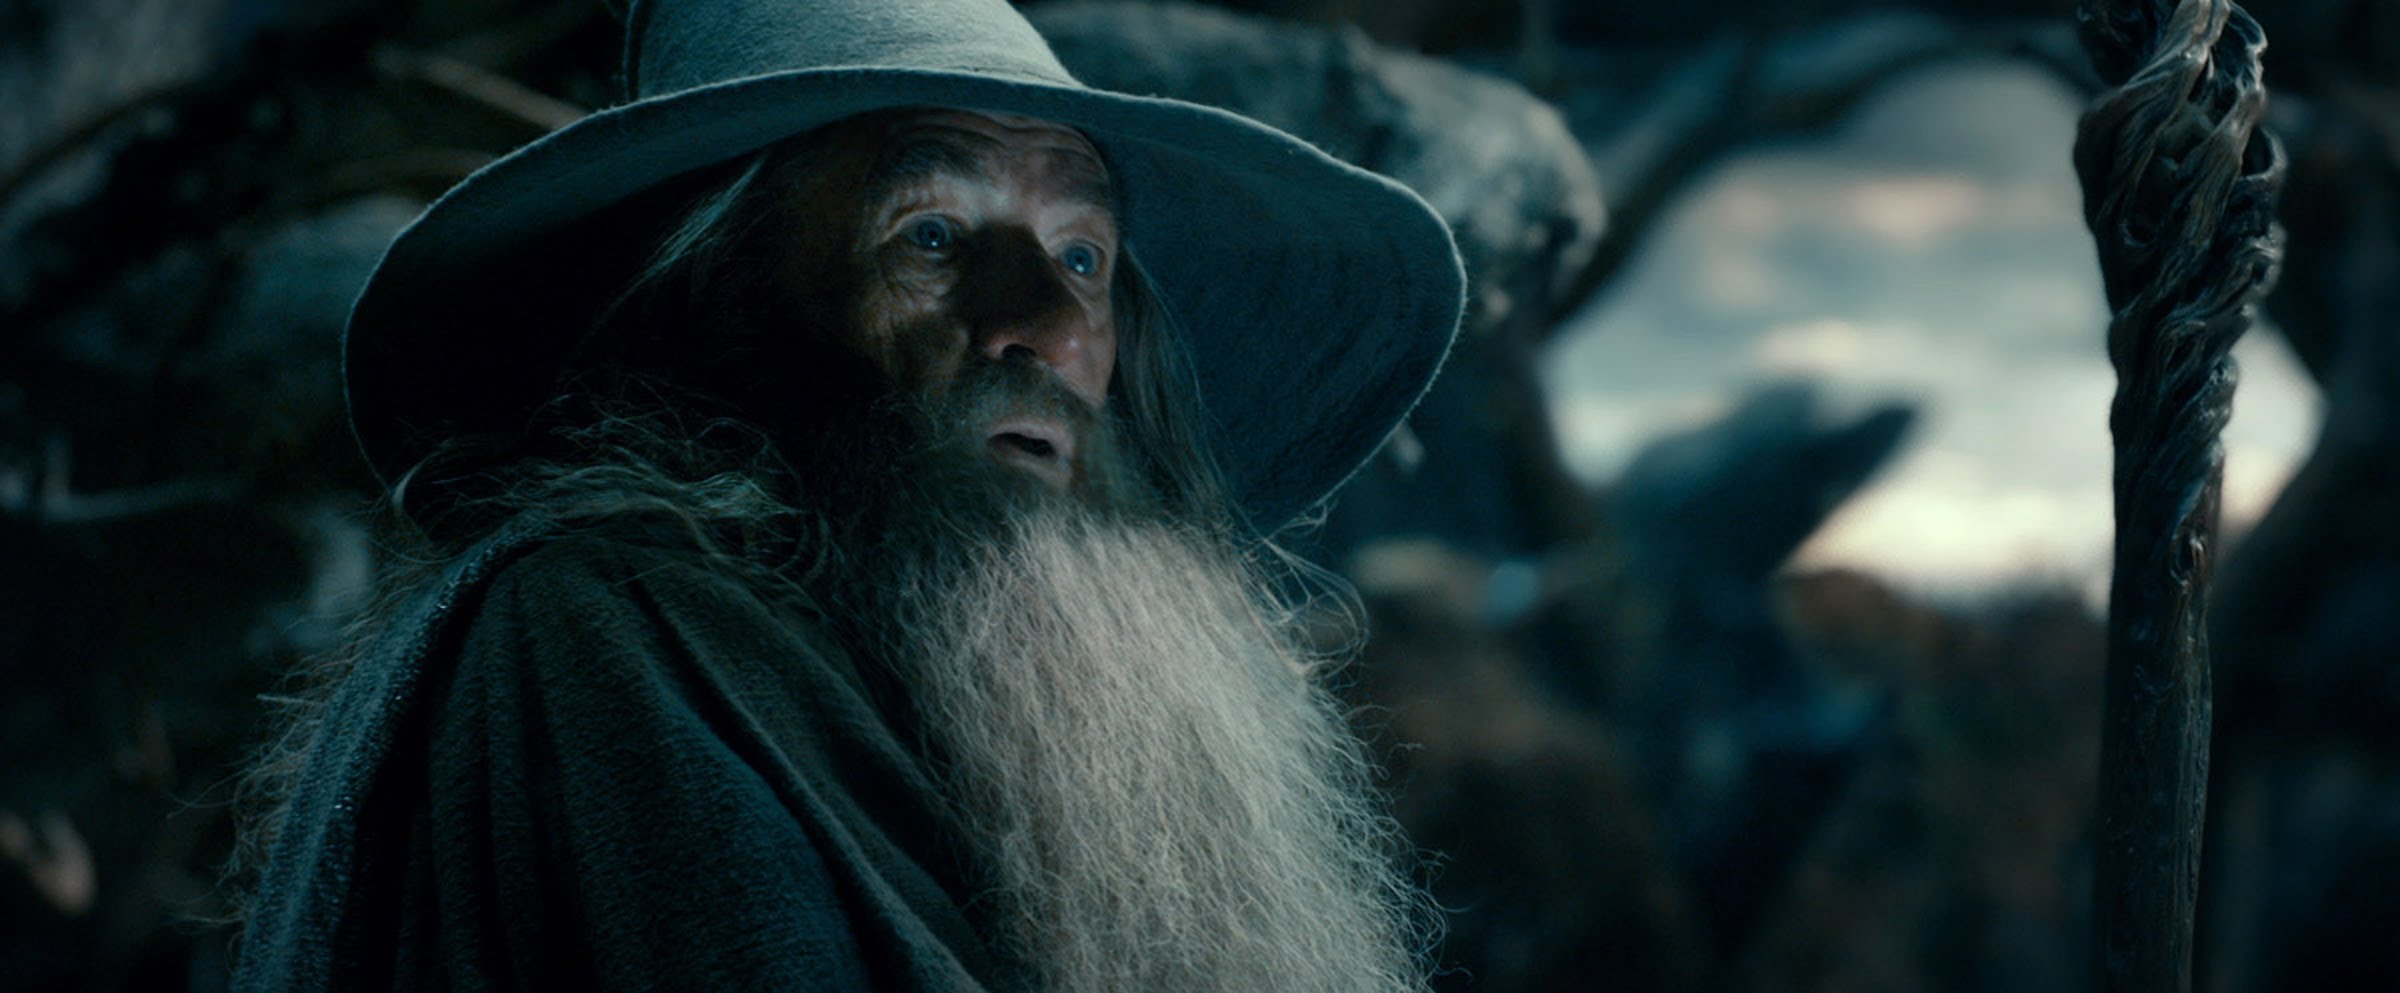 The Hobbit: The Desolation of Smaug oder Smaugs Einöde - Trailer HD